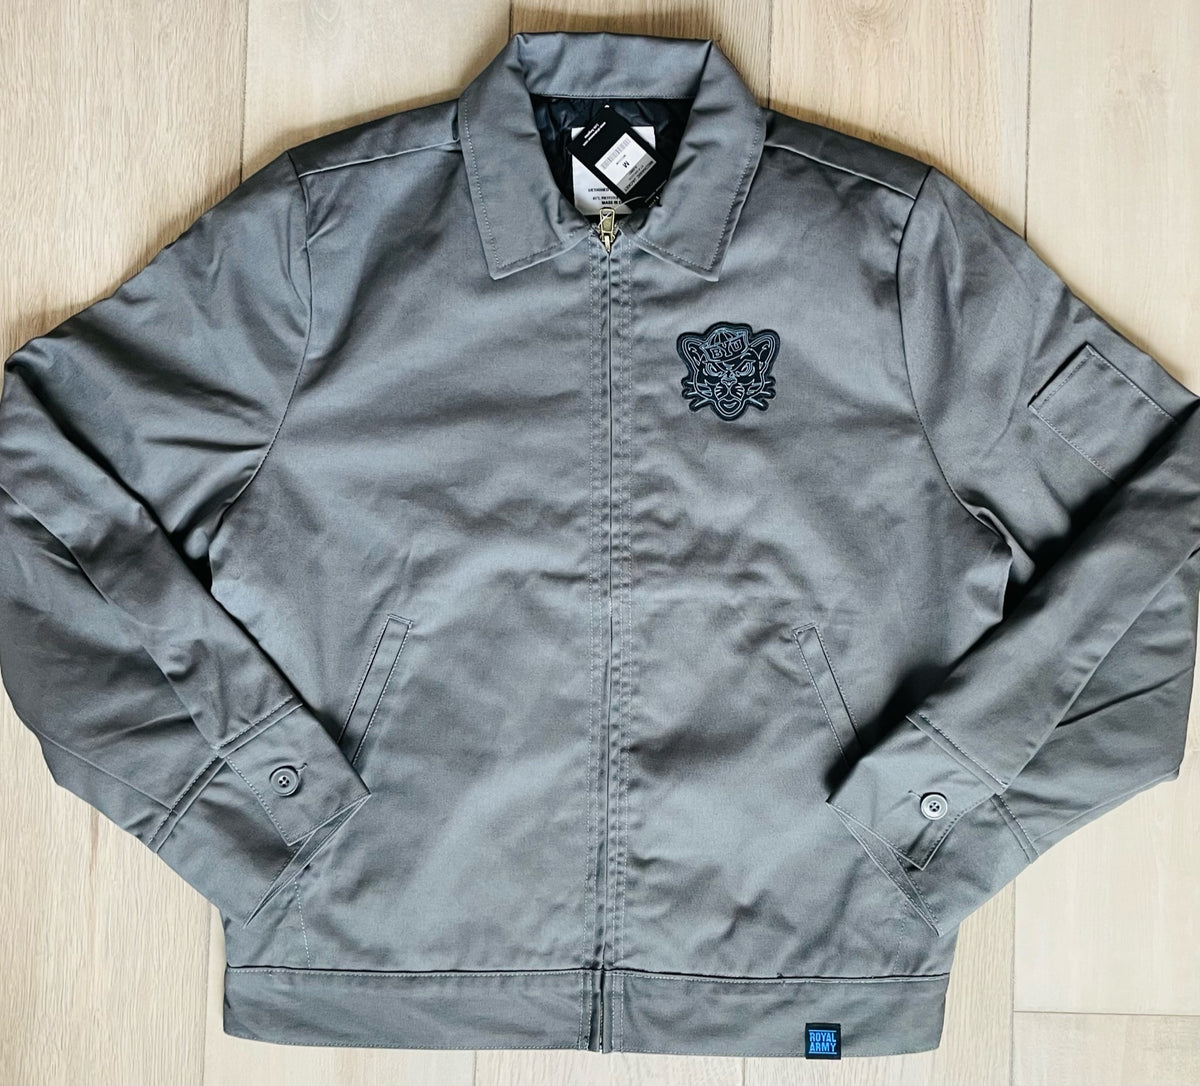 Gray Mechanics Jacket with Custom Black and White BYU Sailor Cougar Patch